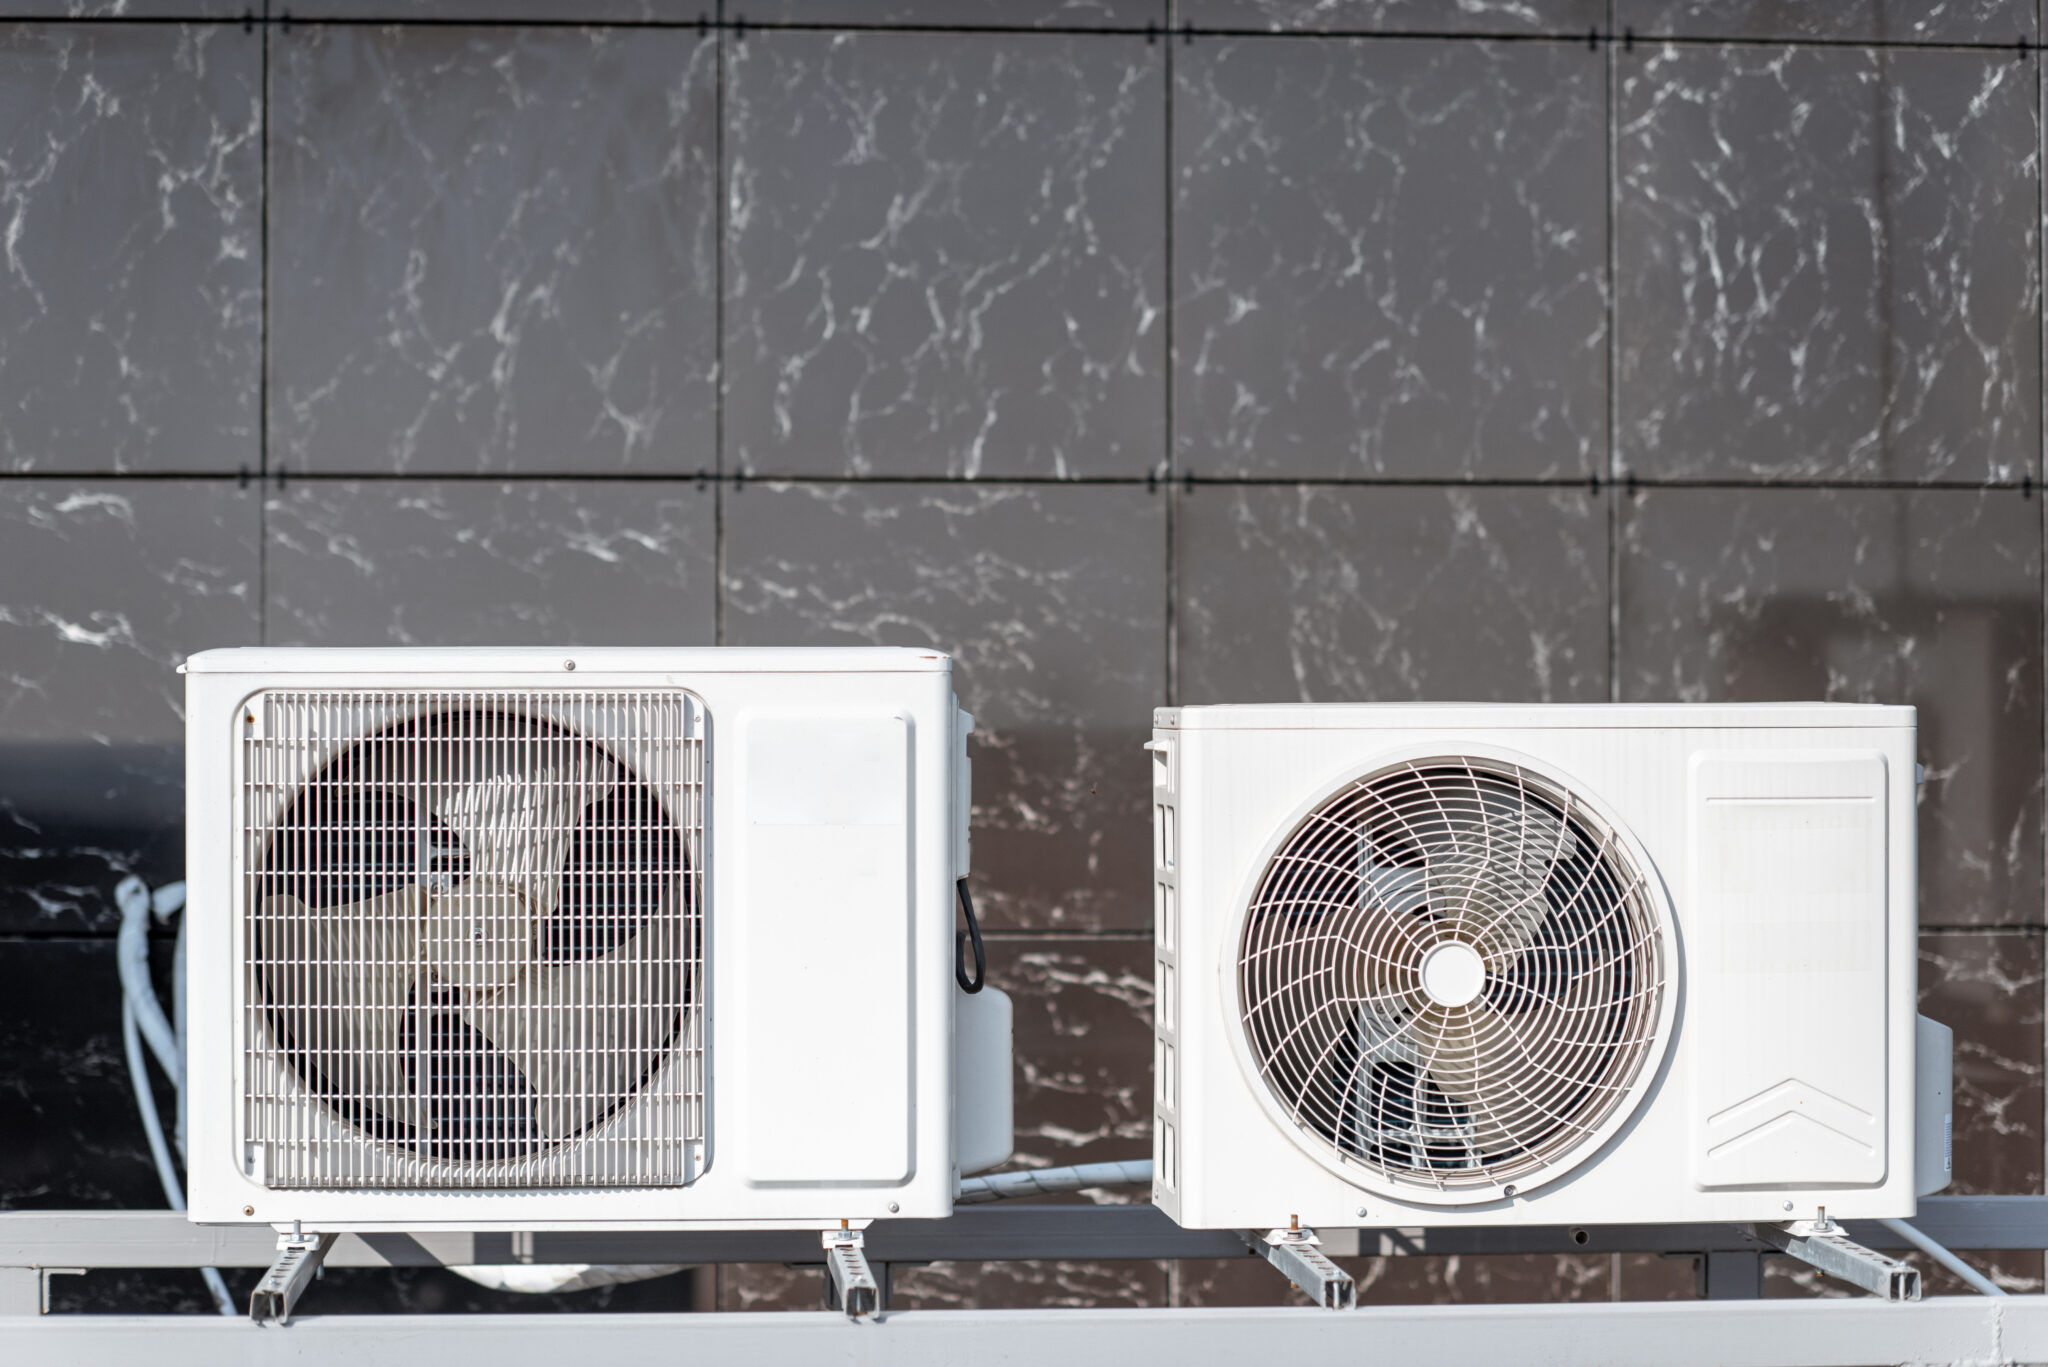 3 things you can do to reduce strain on your AC unit.